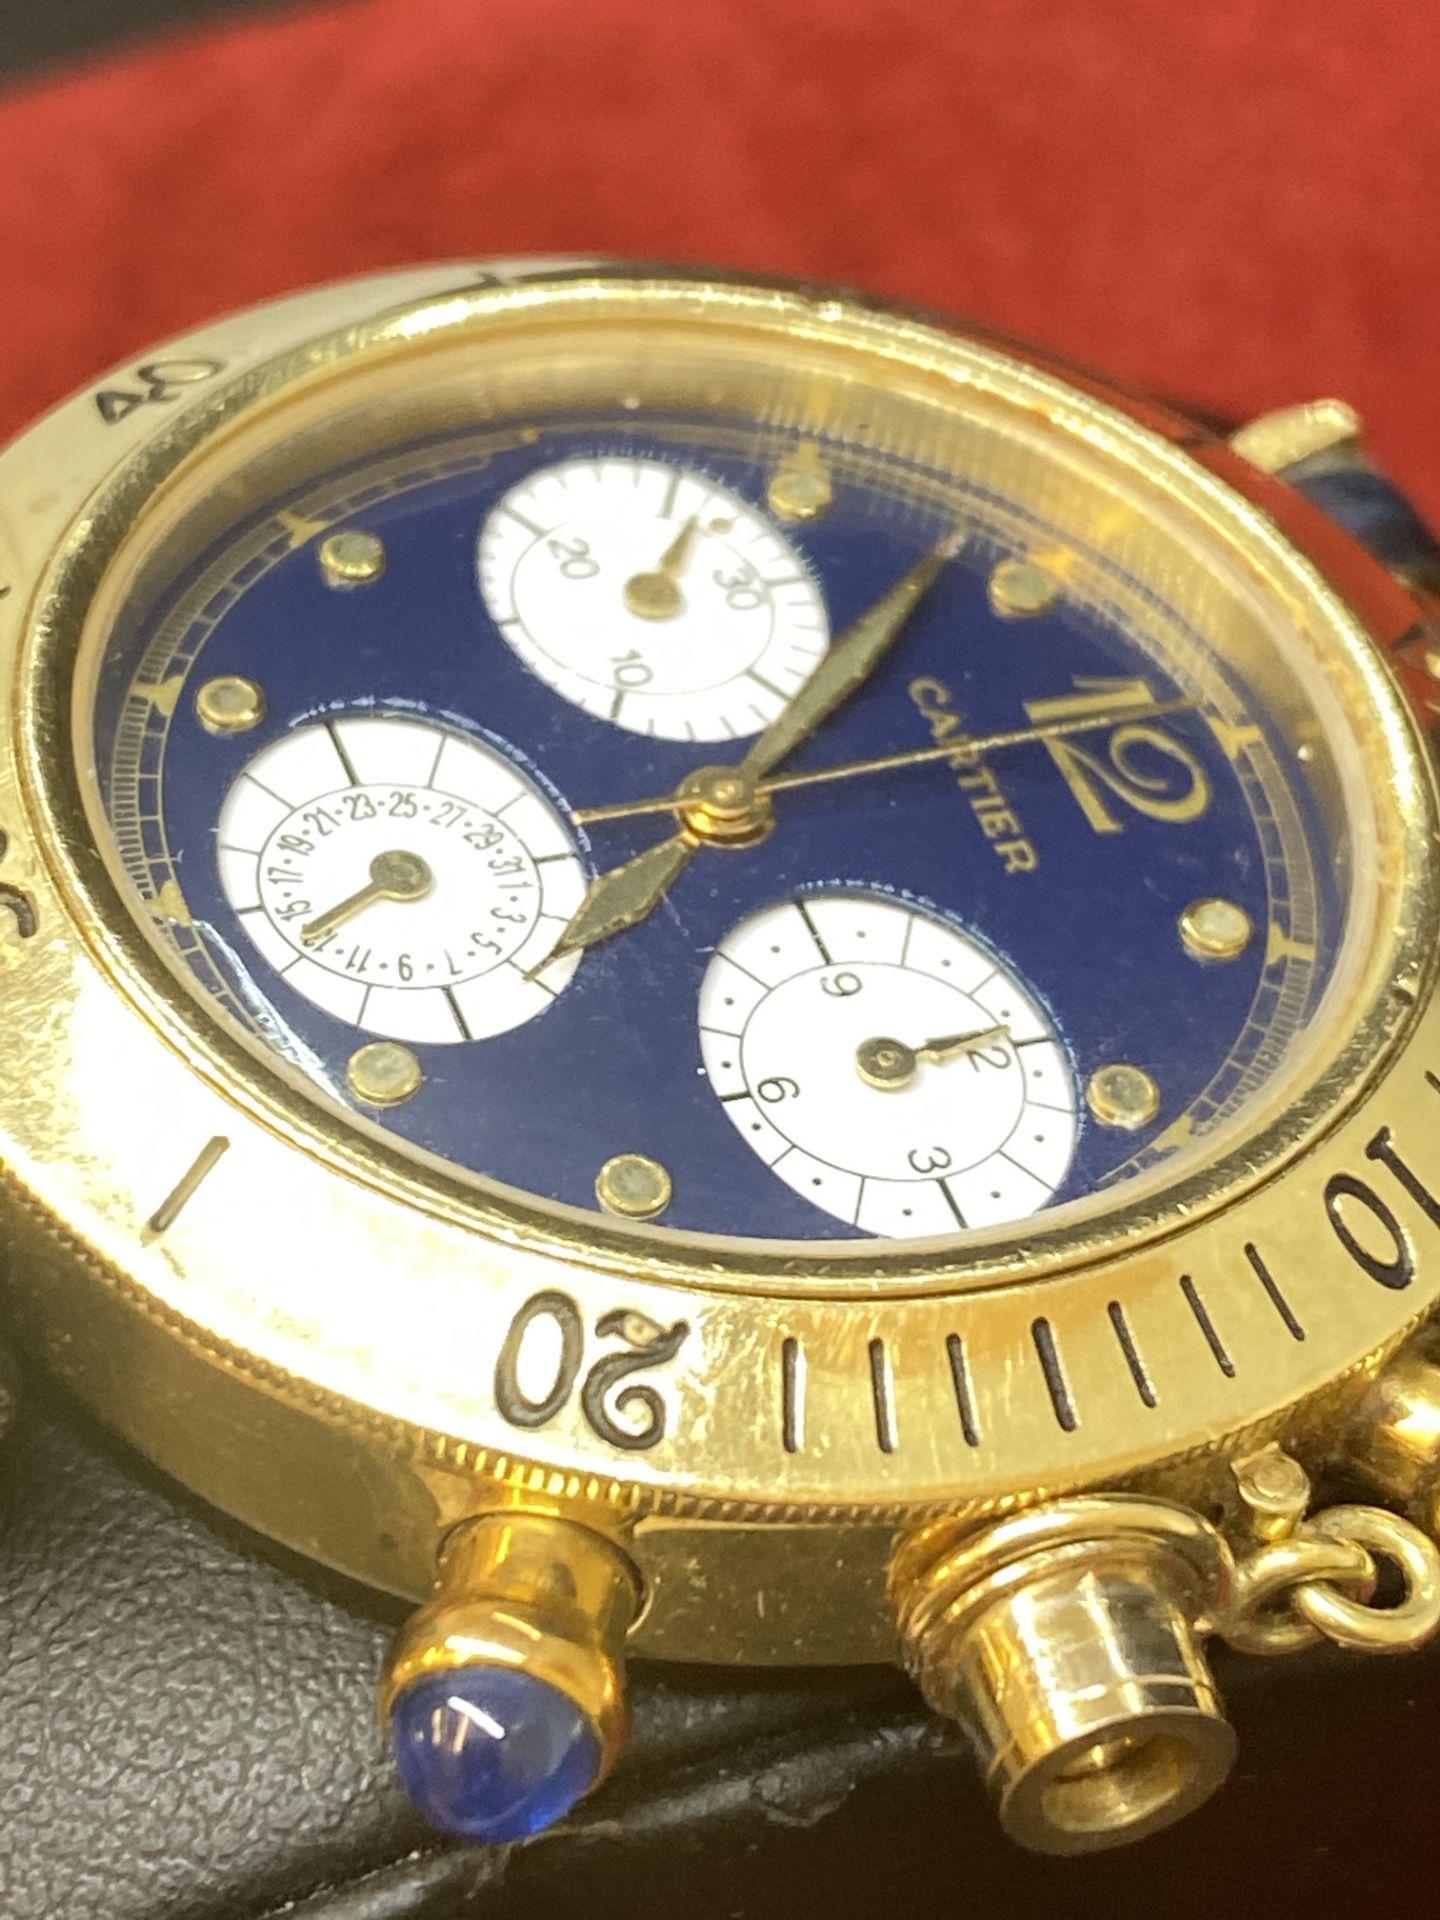 CARTIER CHRONO 18k GOLD WATCH - Image 8 of 12